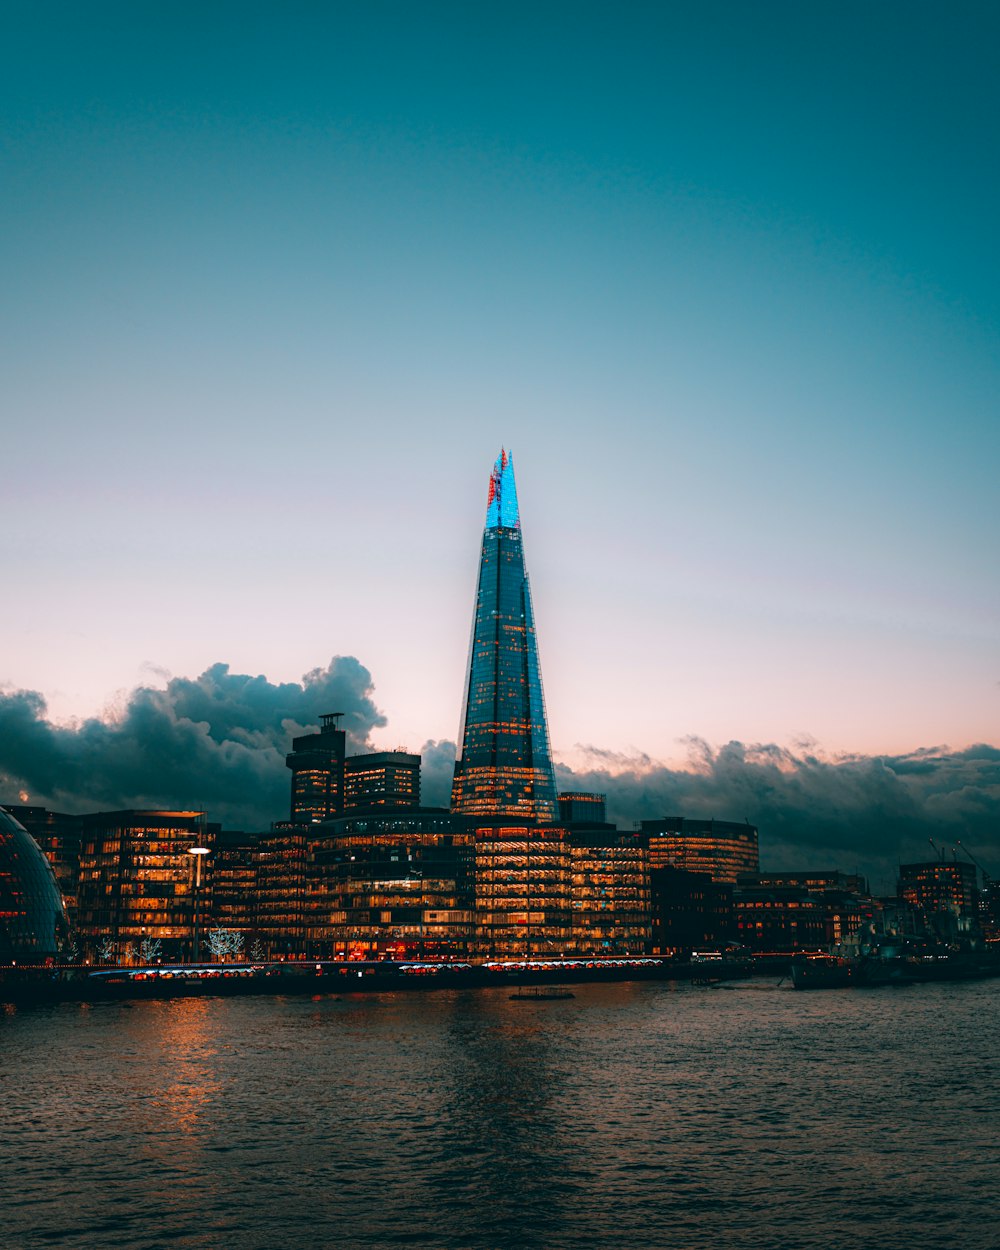 the shard of the building is lit up at night